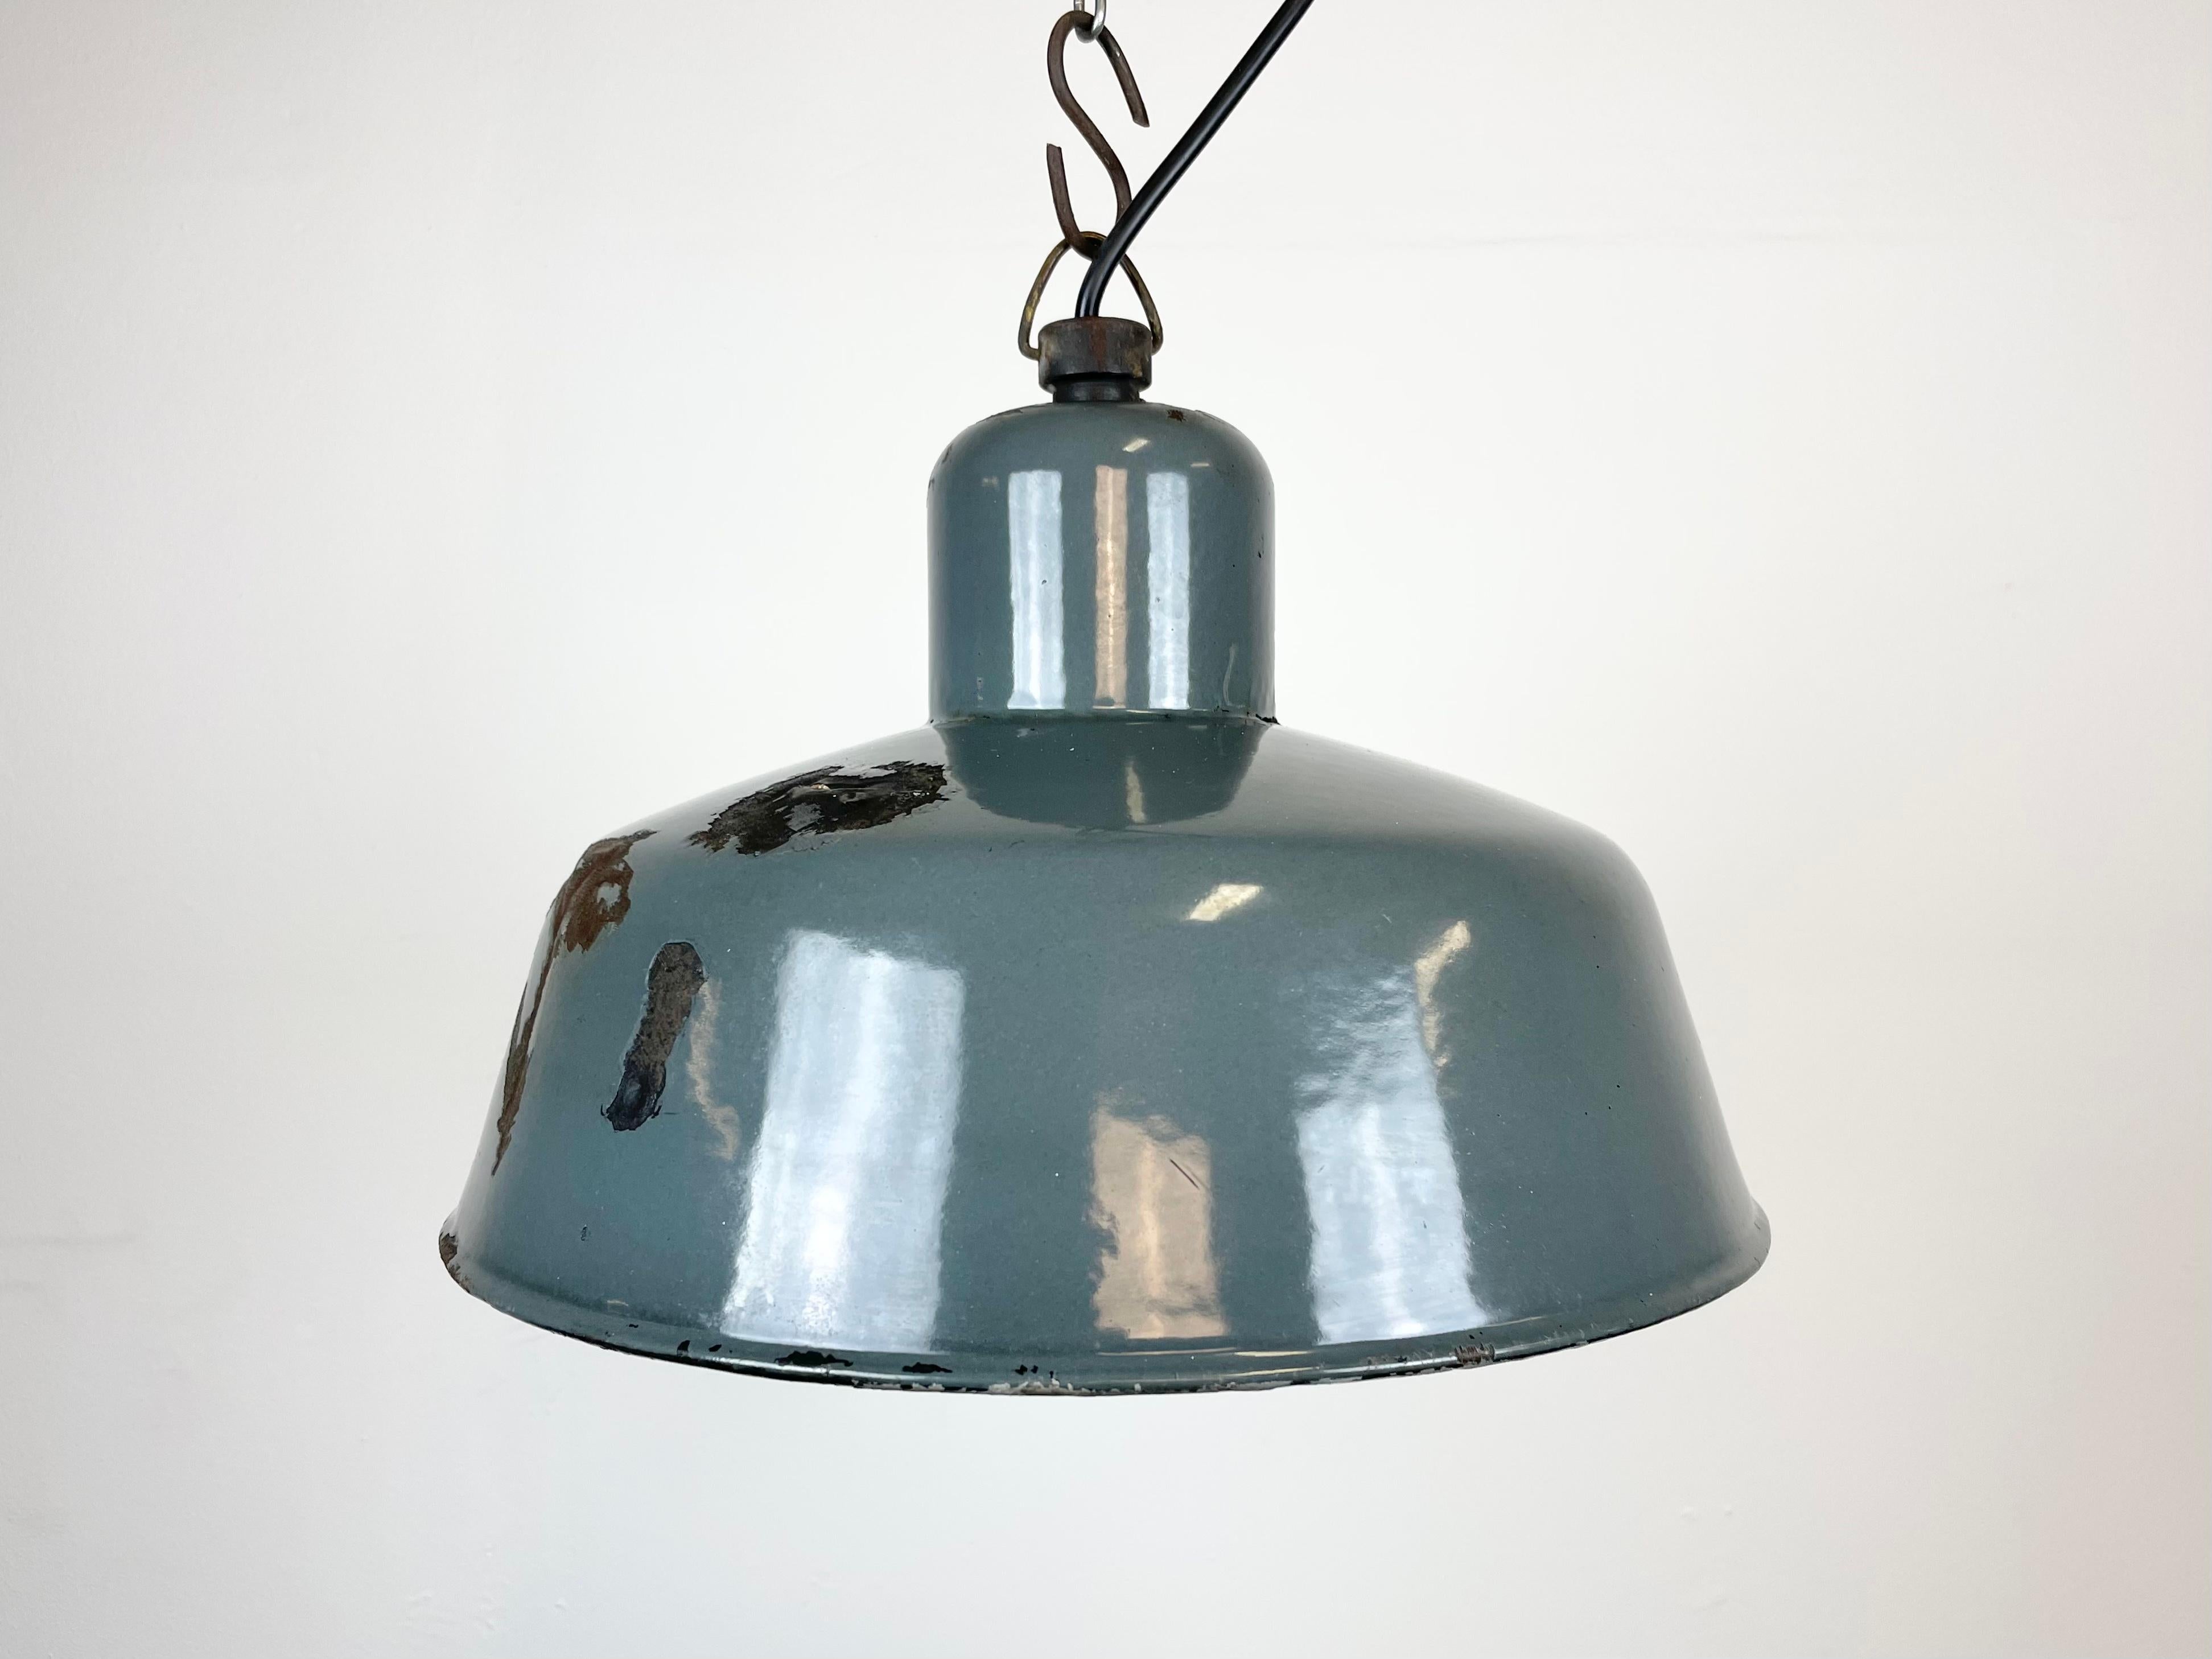 Industrial grey enamel pendant light made by Siemens in Germany during the 1950s. White enamel inside the shade. Iron top. The porcelain socket requires E 27 light bulbs. New wire. Fully functional. The weight of the lamp is 1 kg. Unfortunately, the